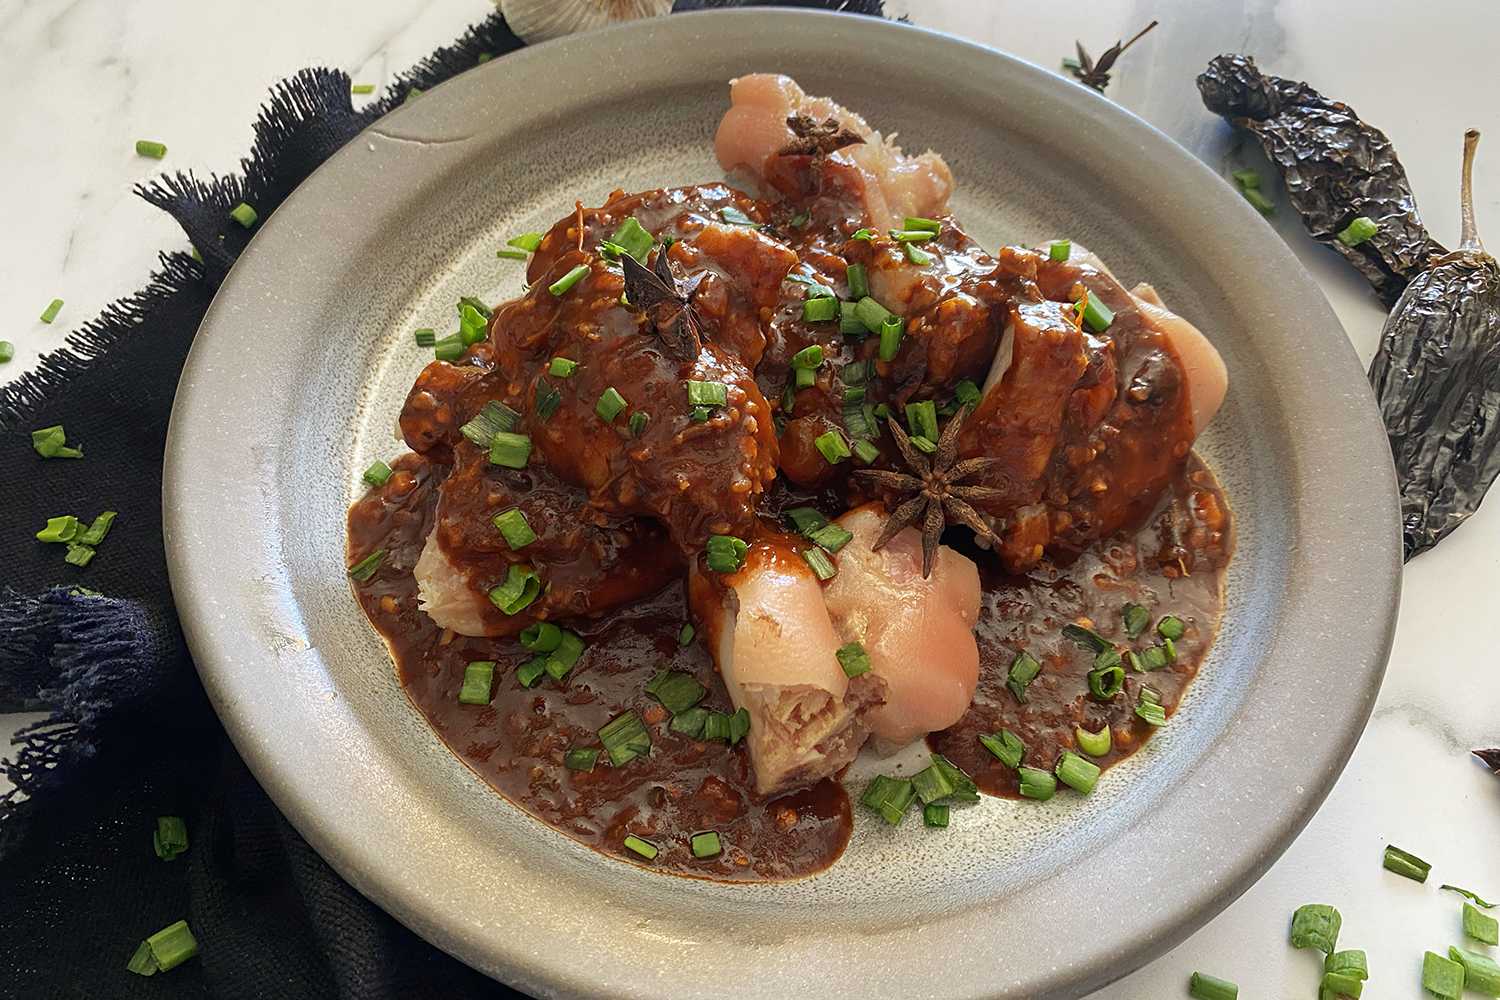 Cooked pork hocks with brown sauce and chopped scallion on top in a gray plate